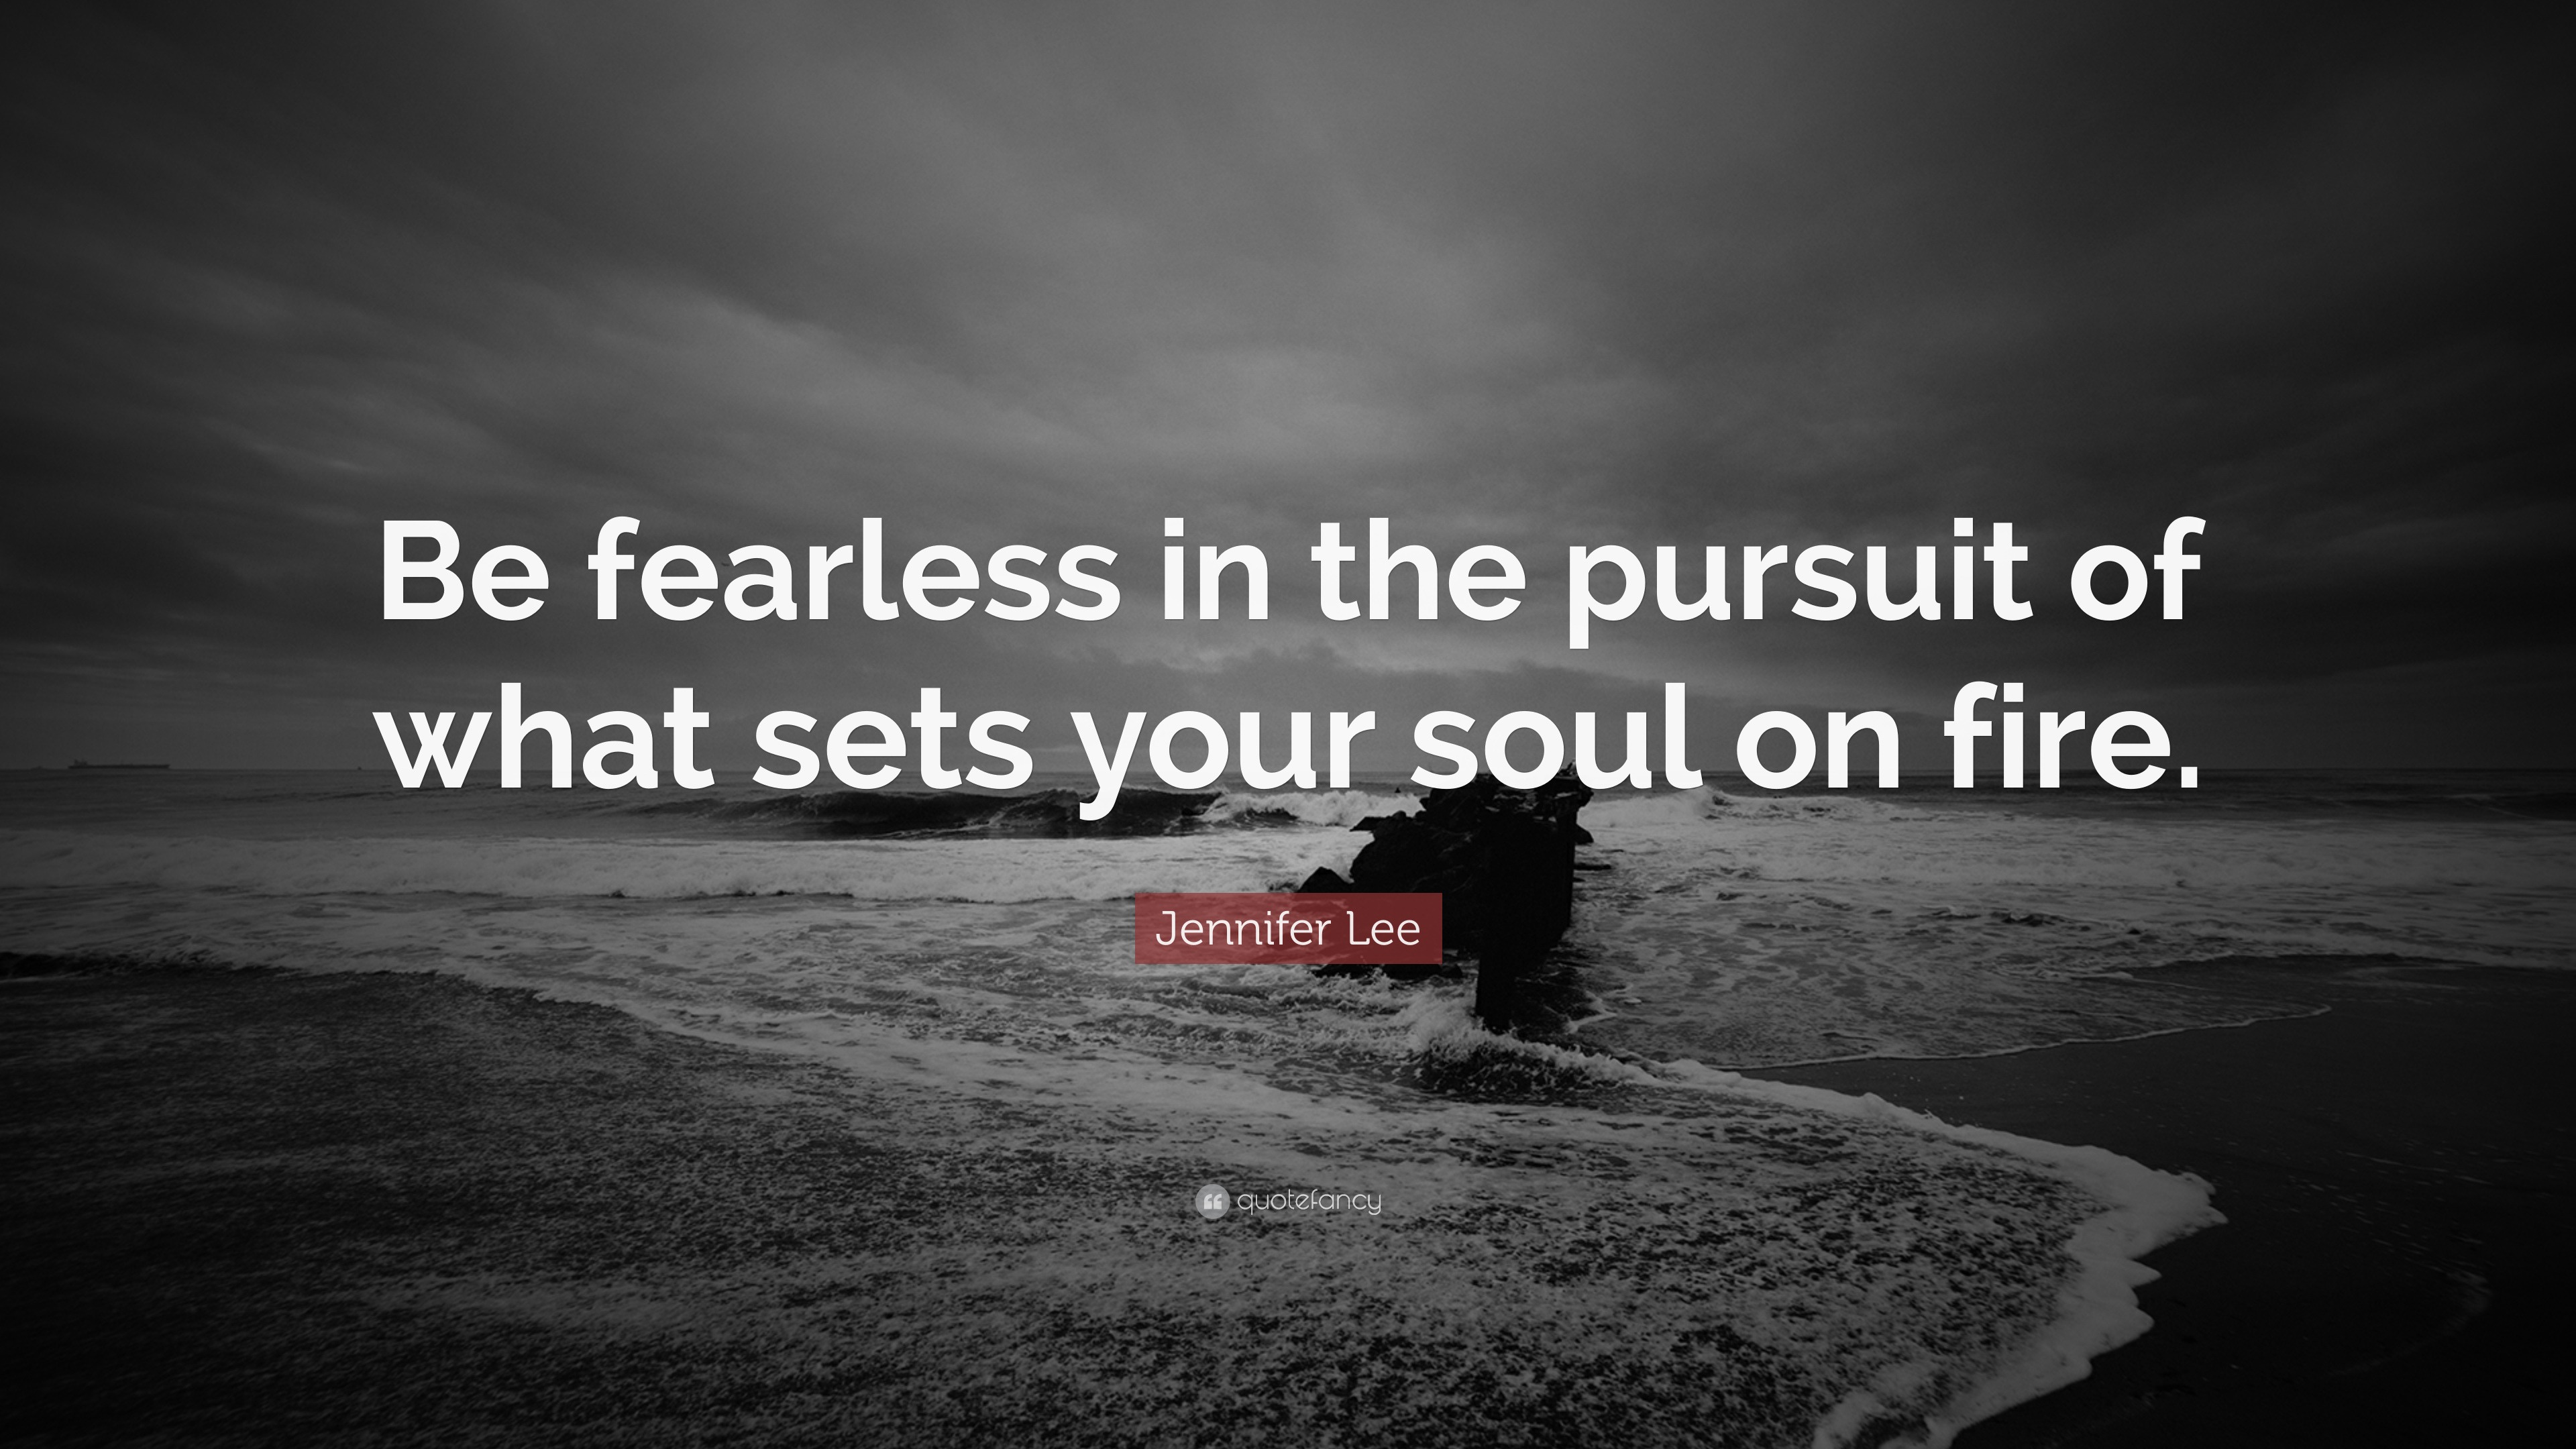 Be fearless in the pursuit of what sets your